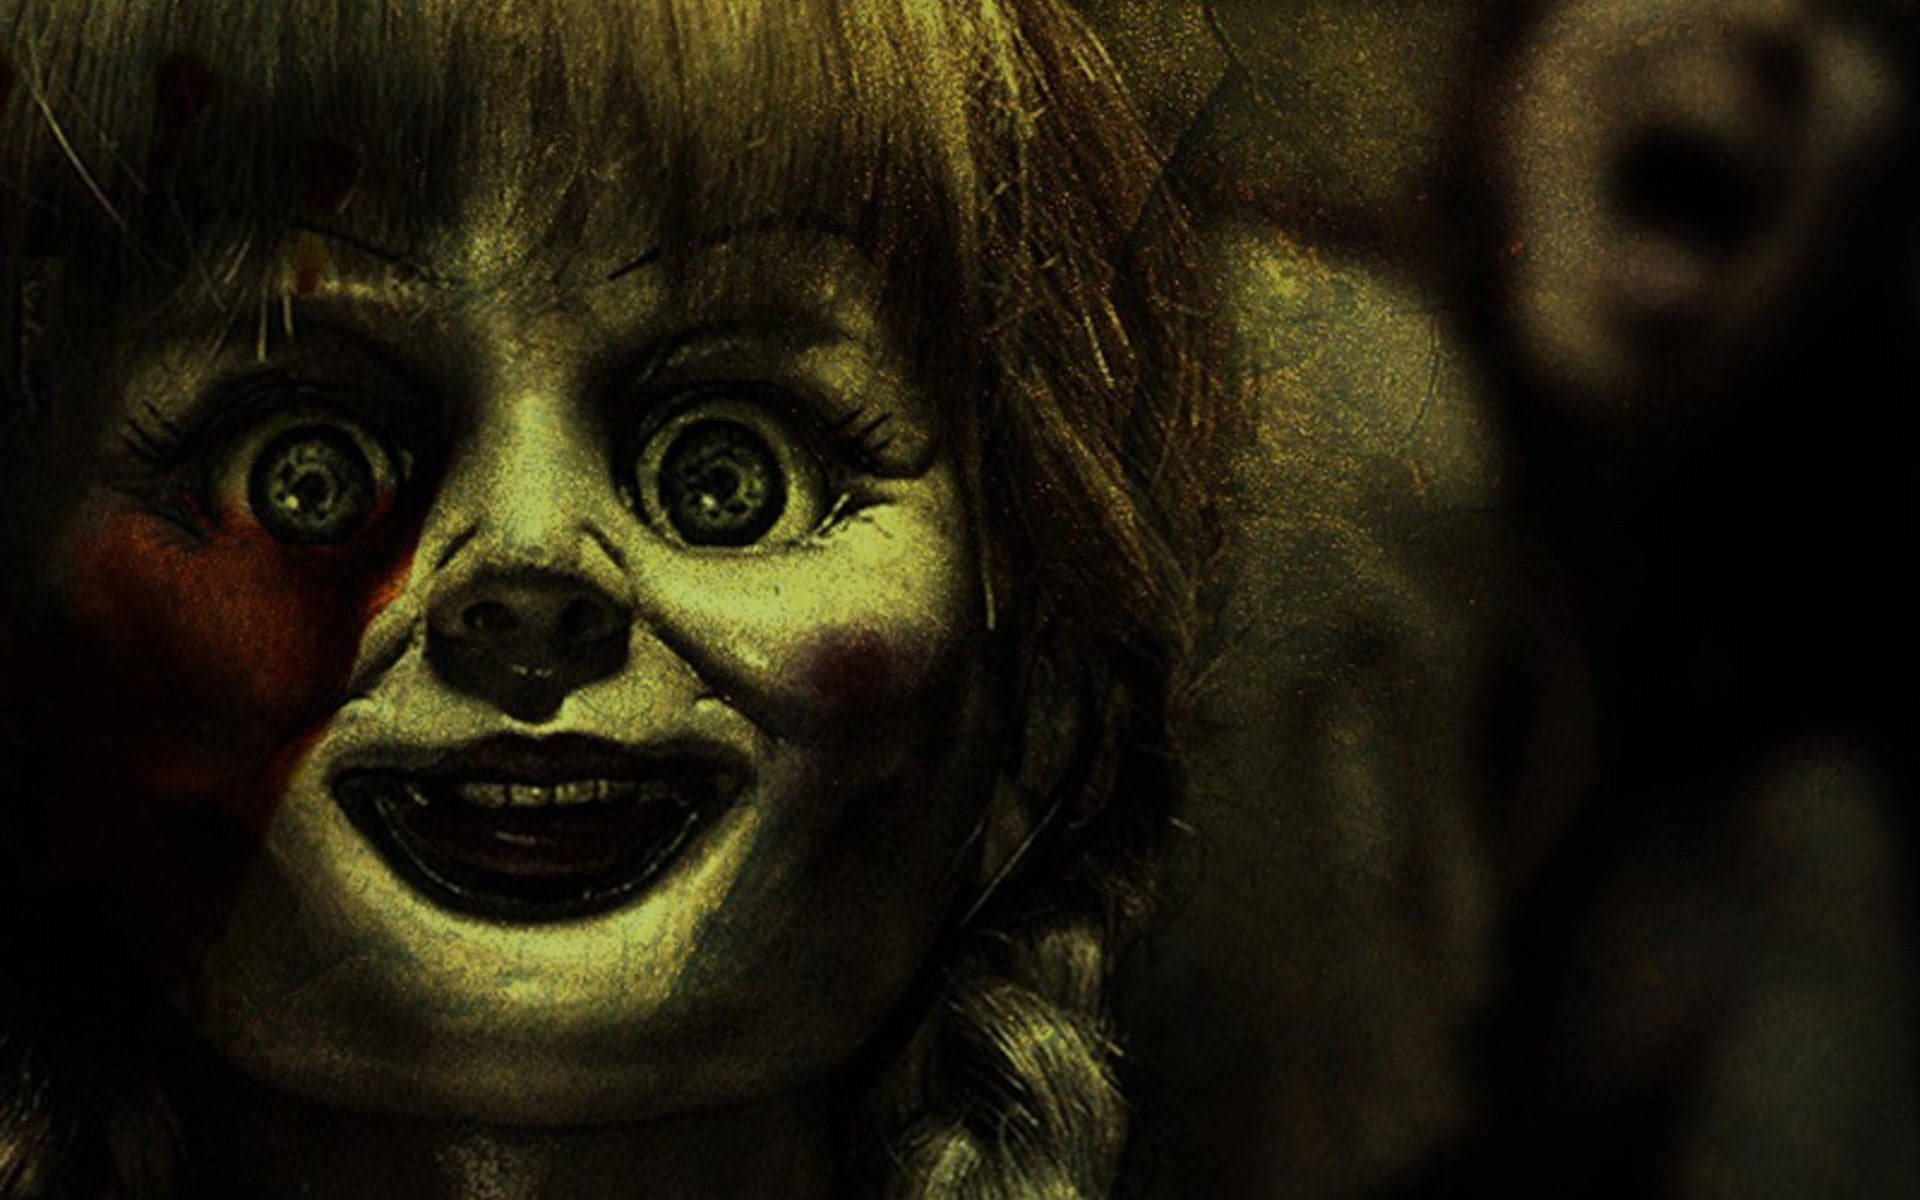 Closed-up Annabelle Doll